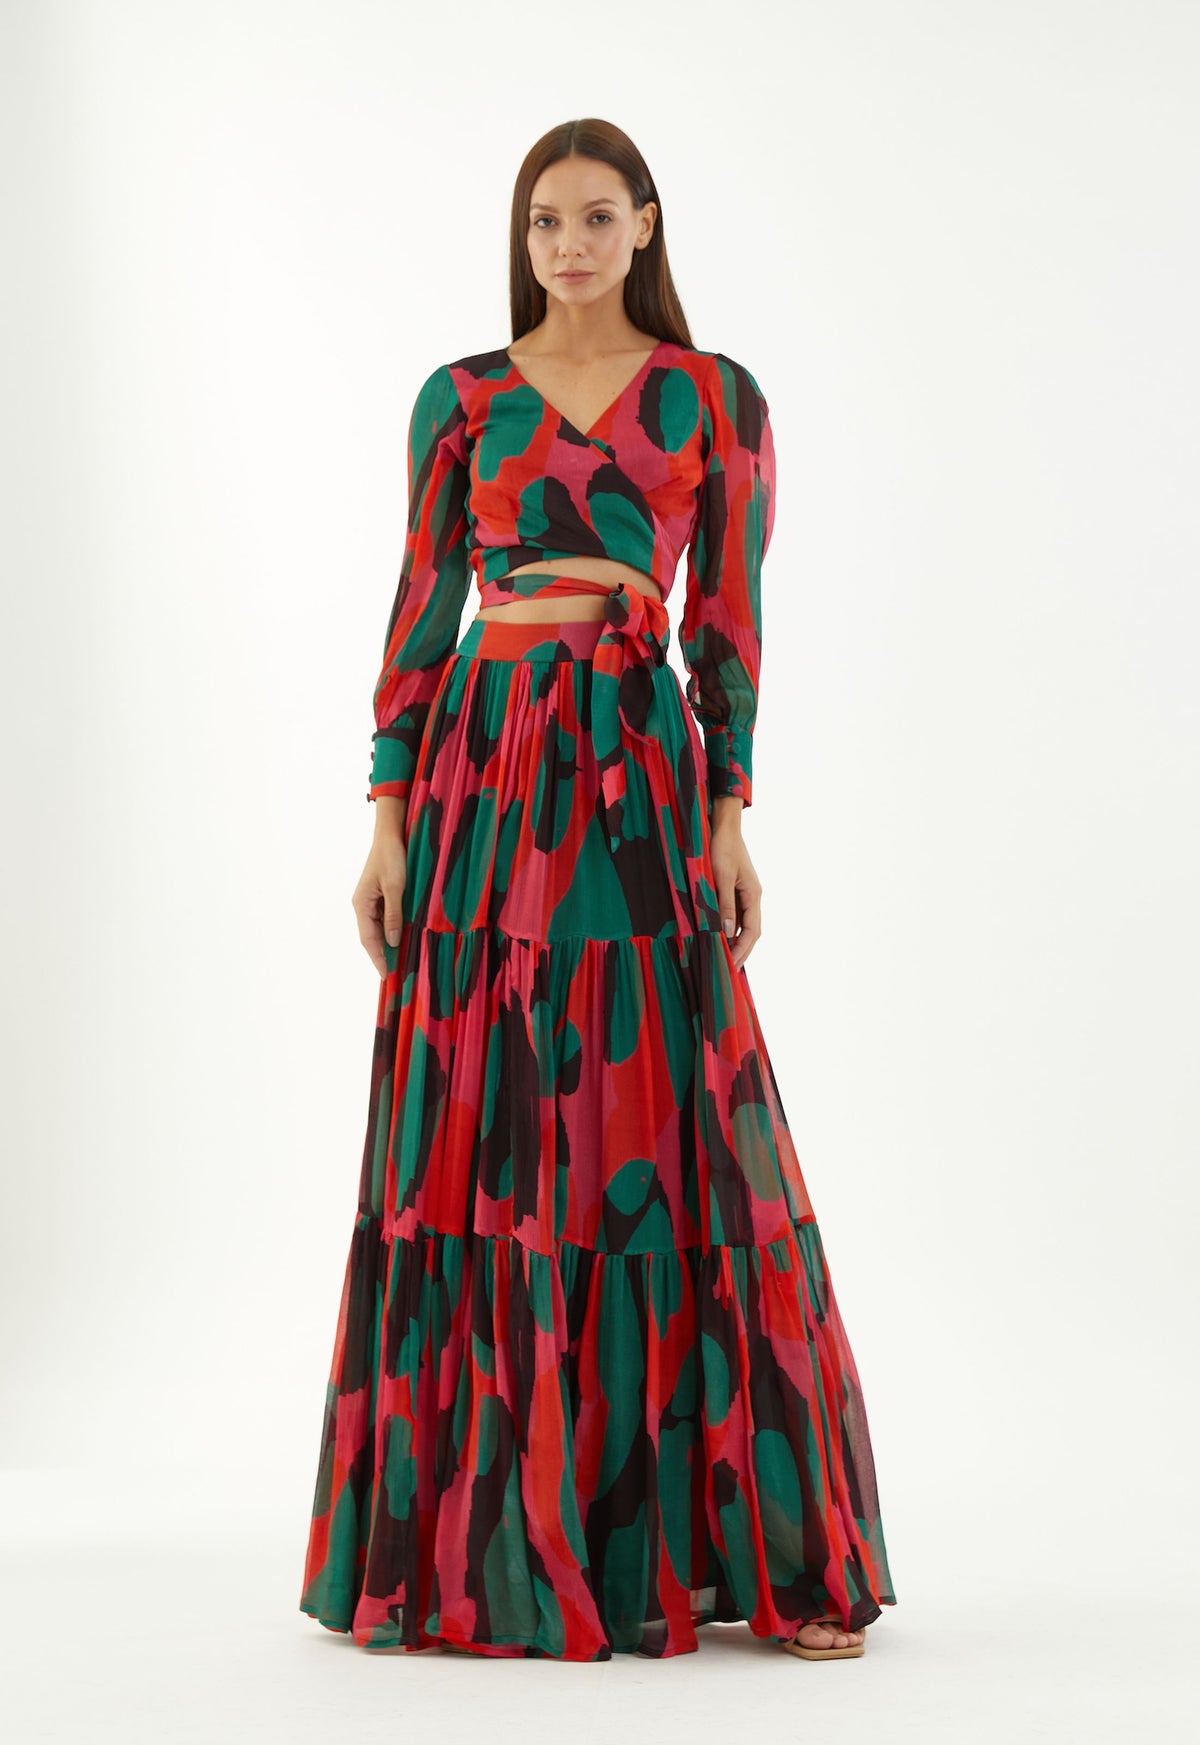 RED, GREEN AND BLACK ABSTRACT LAYER SKIRT